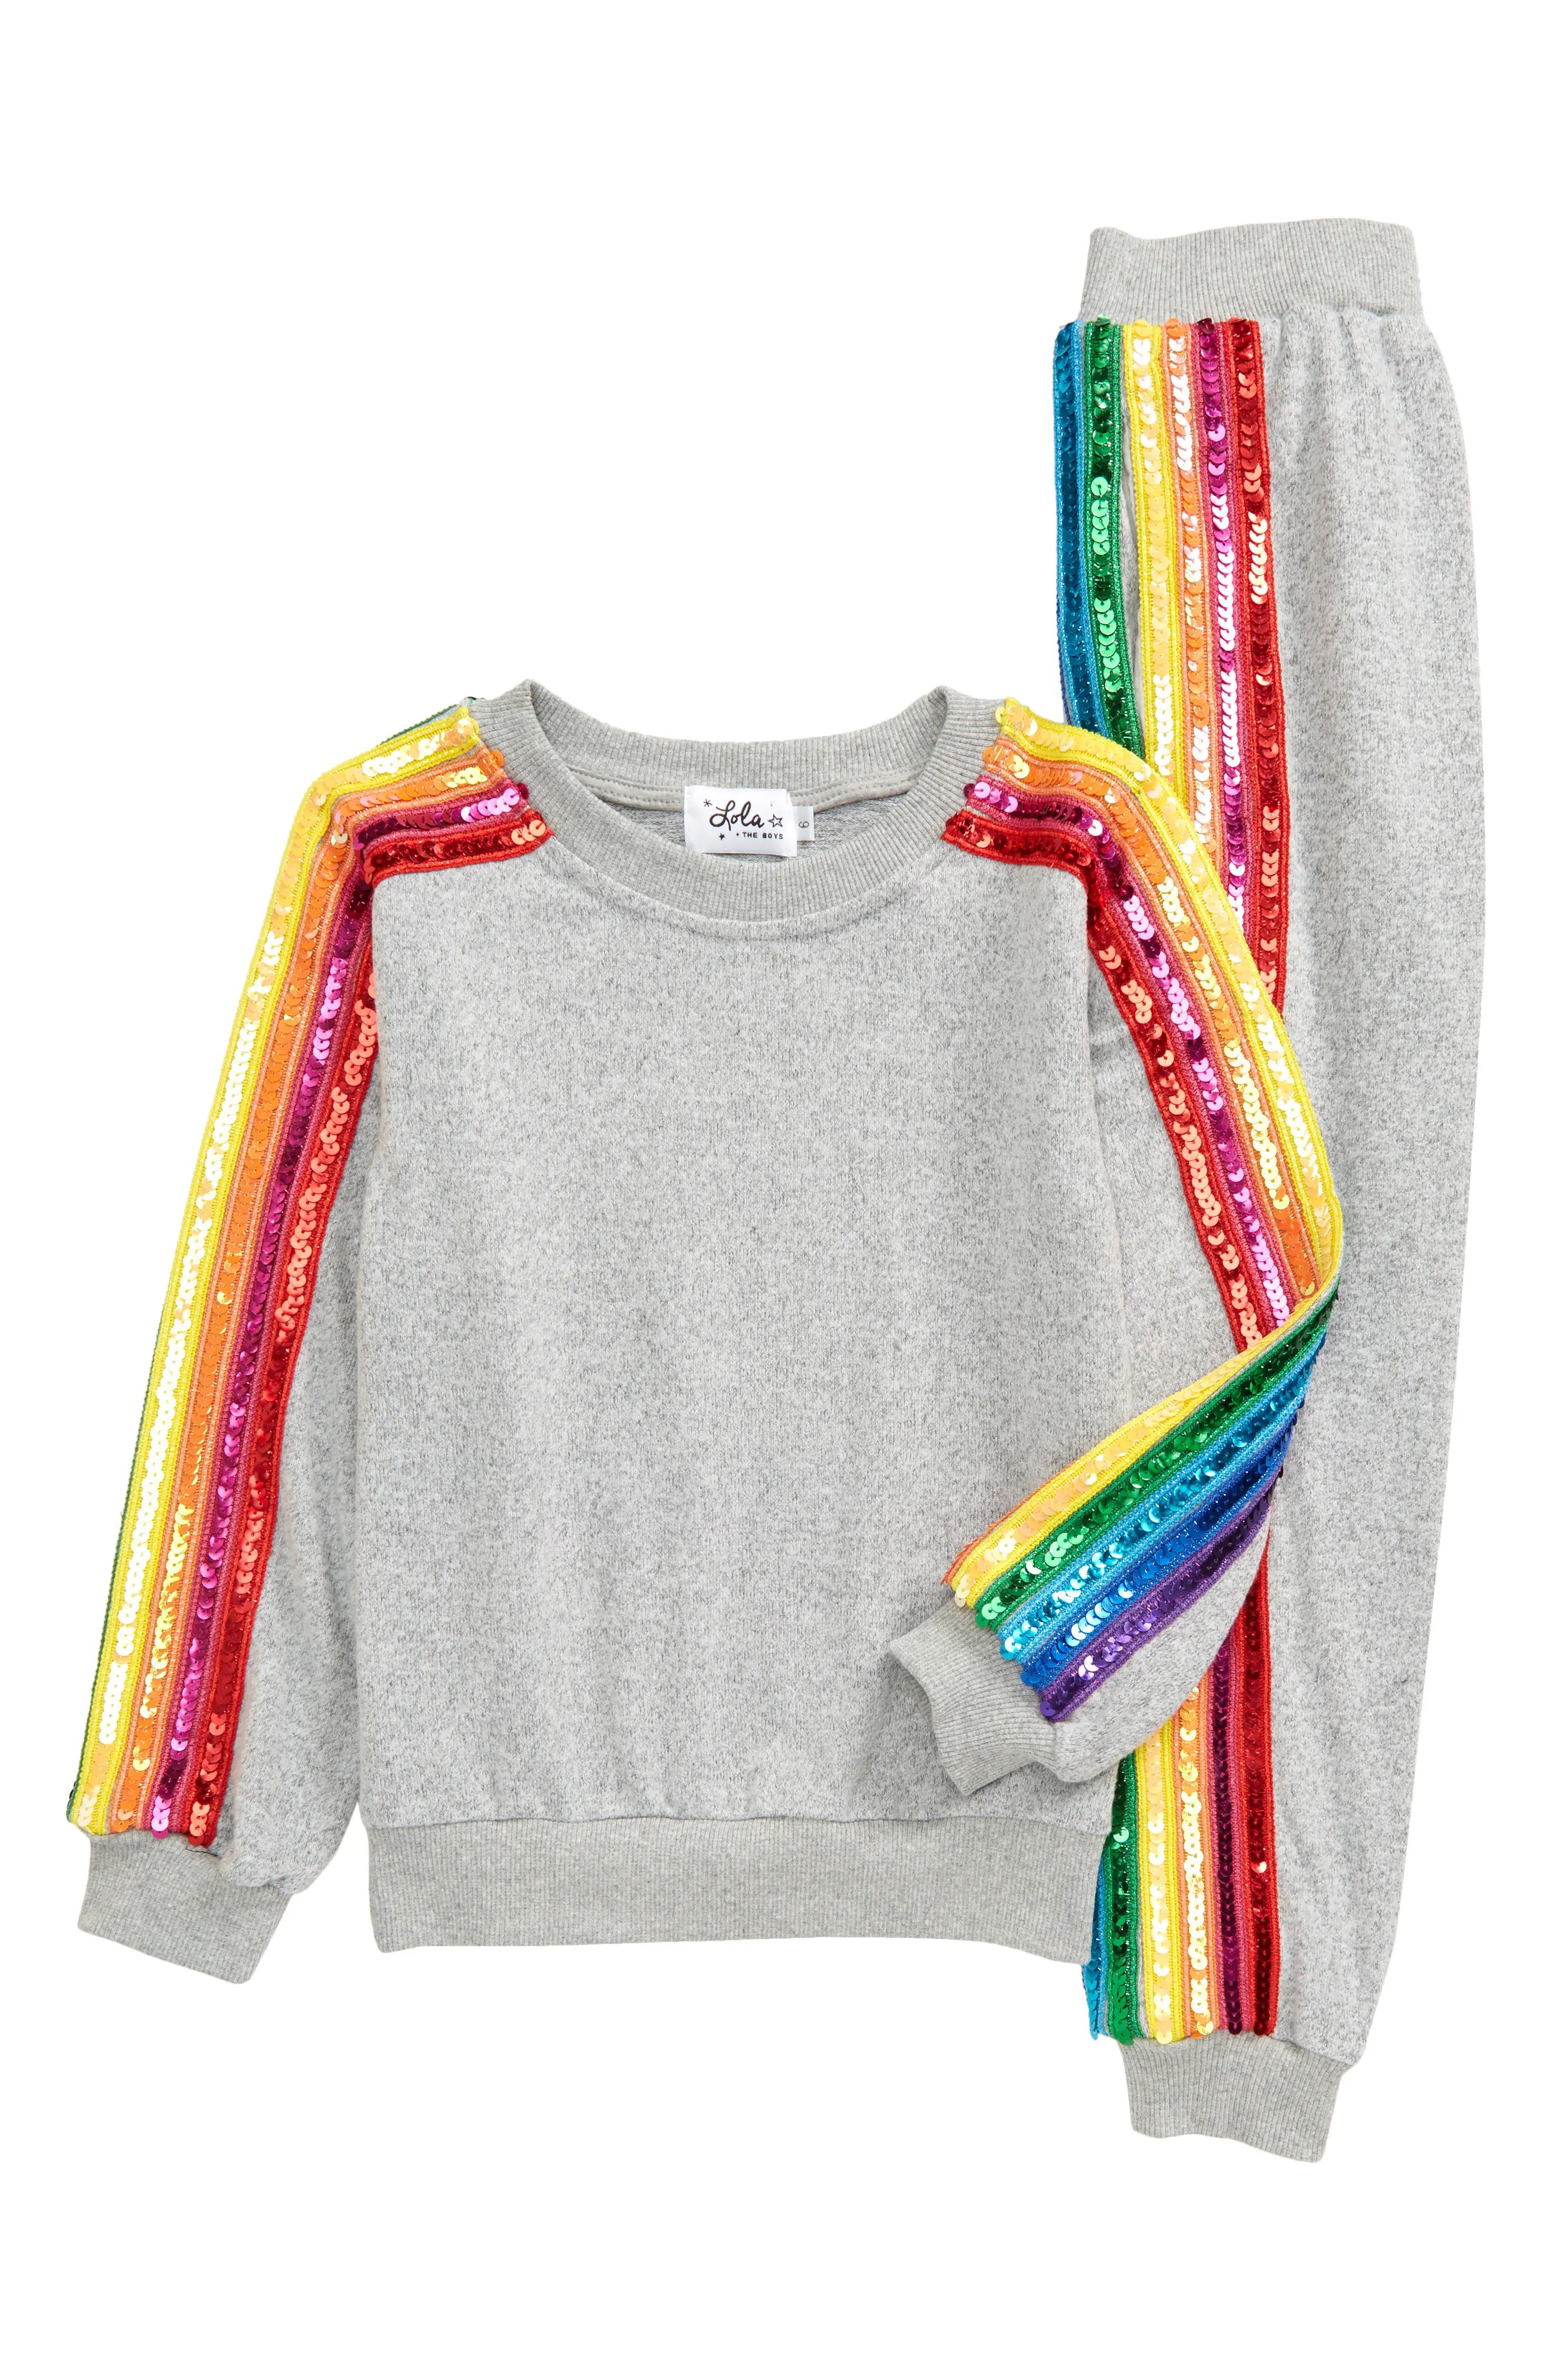 Lola & the Boys Sequin Sweatshirt & Joggers Set in Grey at Nordstrom, Size 12 | Nordstrom